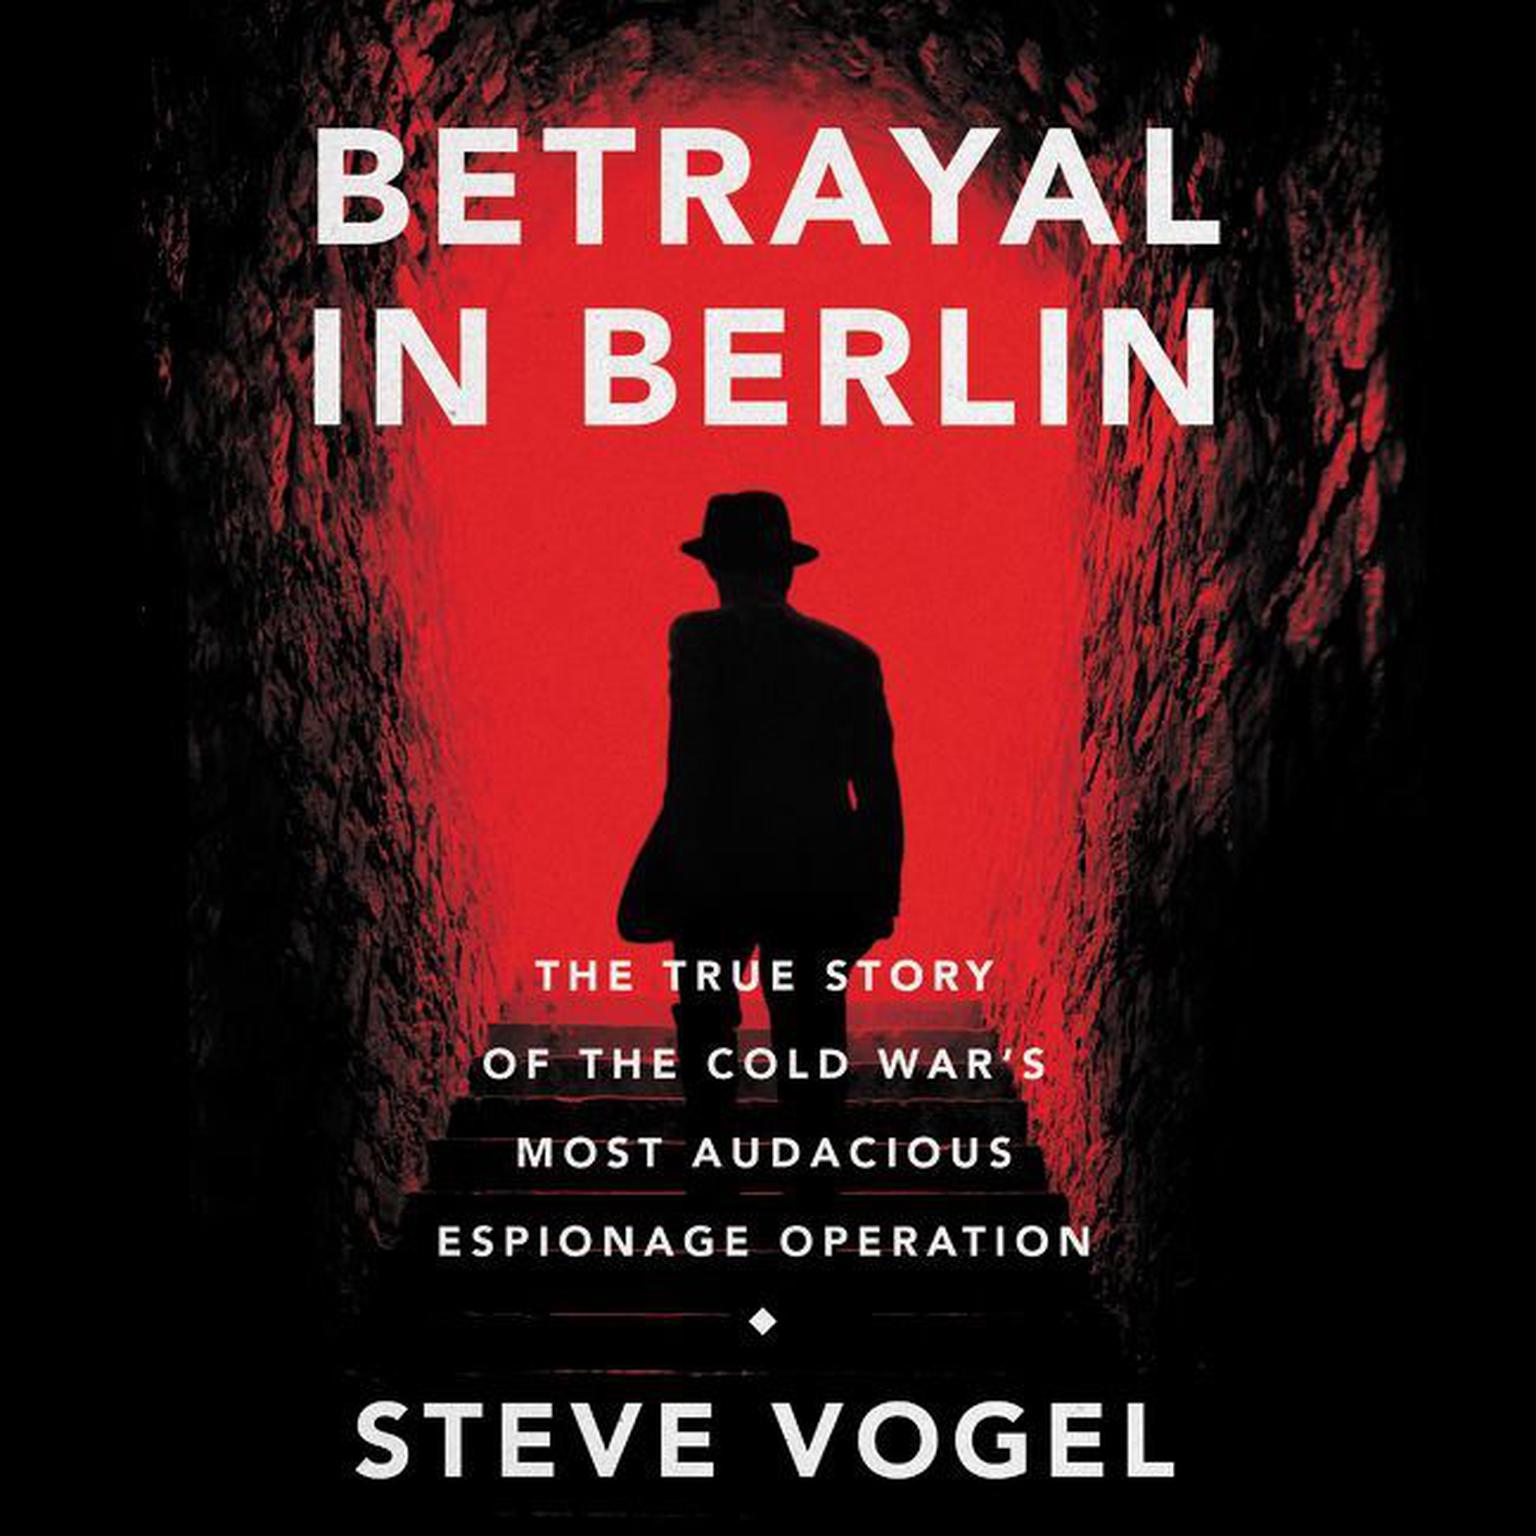 Betrayal in Berlin: The True Story of the Cold Wars Most Audacious Espionage Operation Audiobook, by Steve Vogel